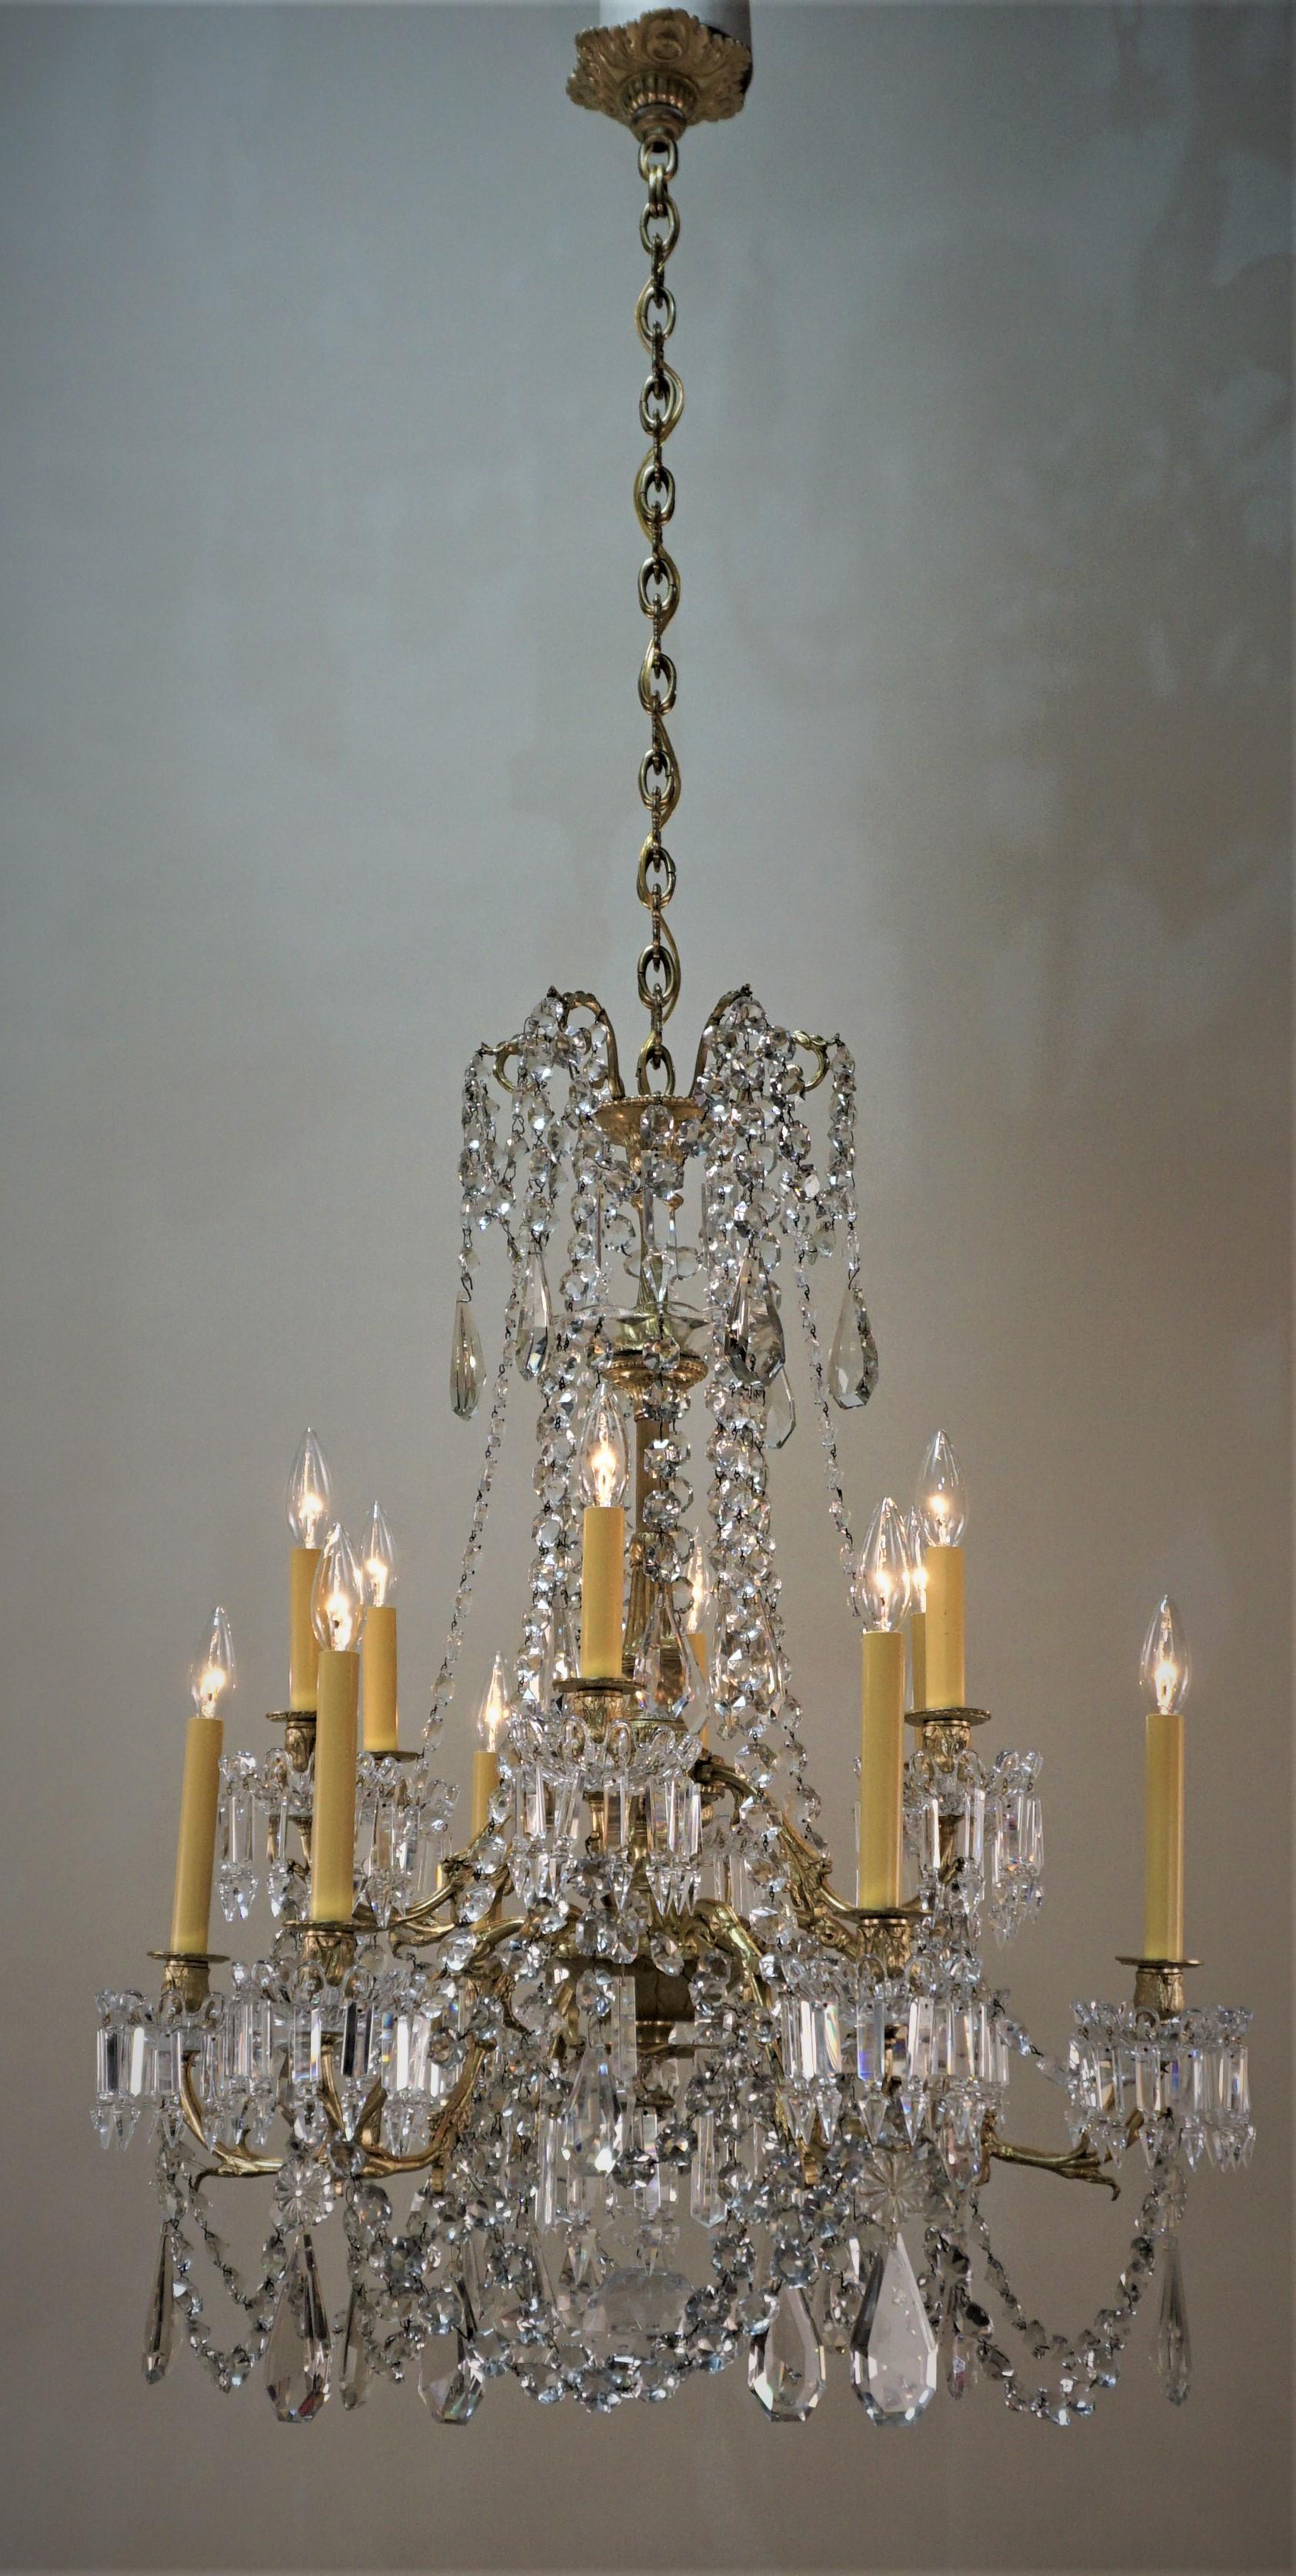 An elegant 19th century signed French Baccarat crystal chandelier. This chandelier has 12-light that have been electrified and surrounded with sparkling crystals
Measurement width 29